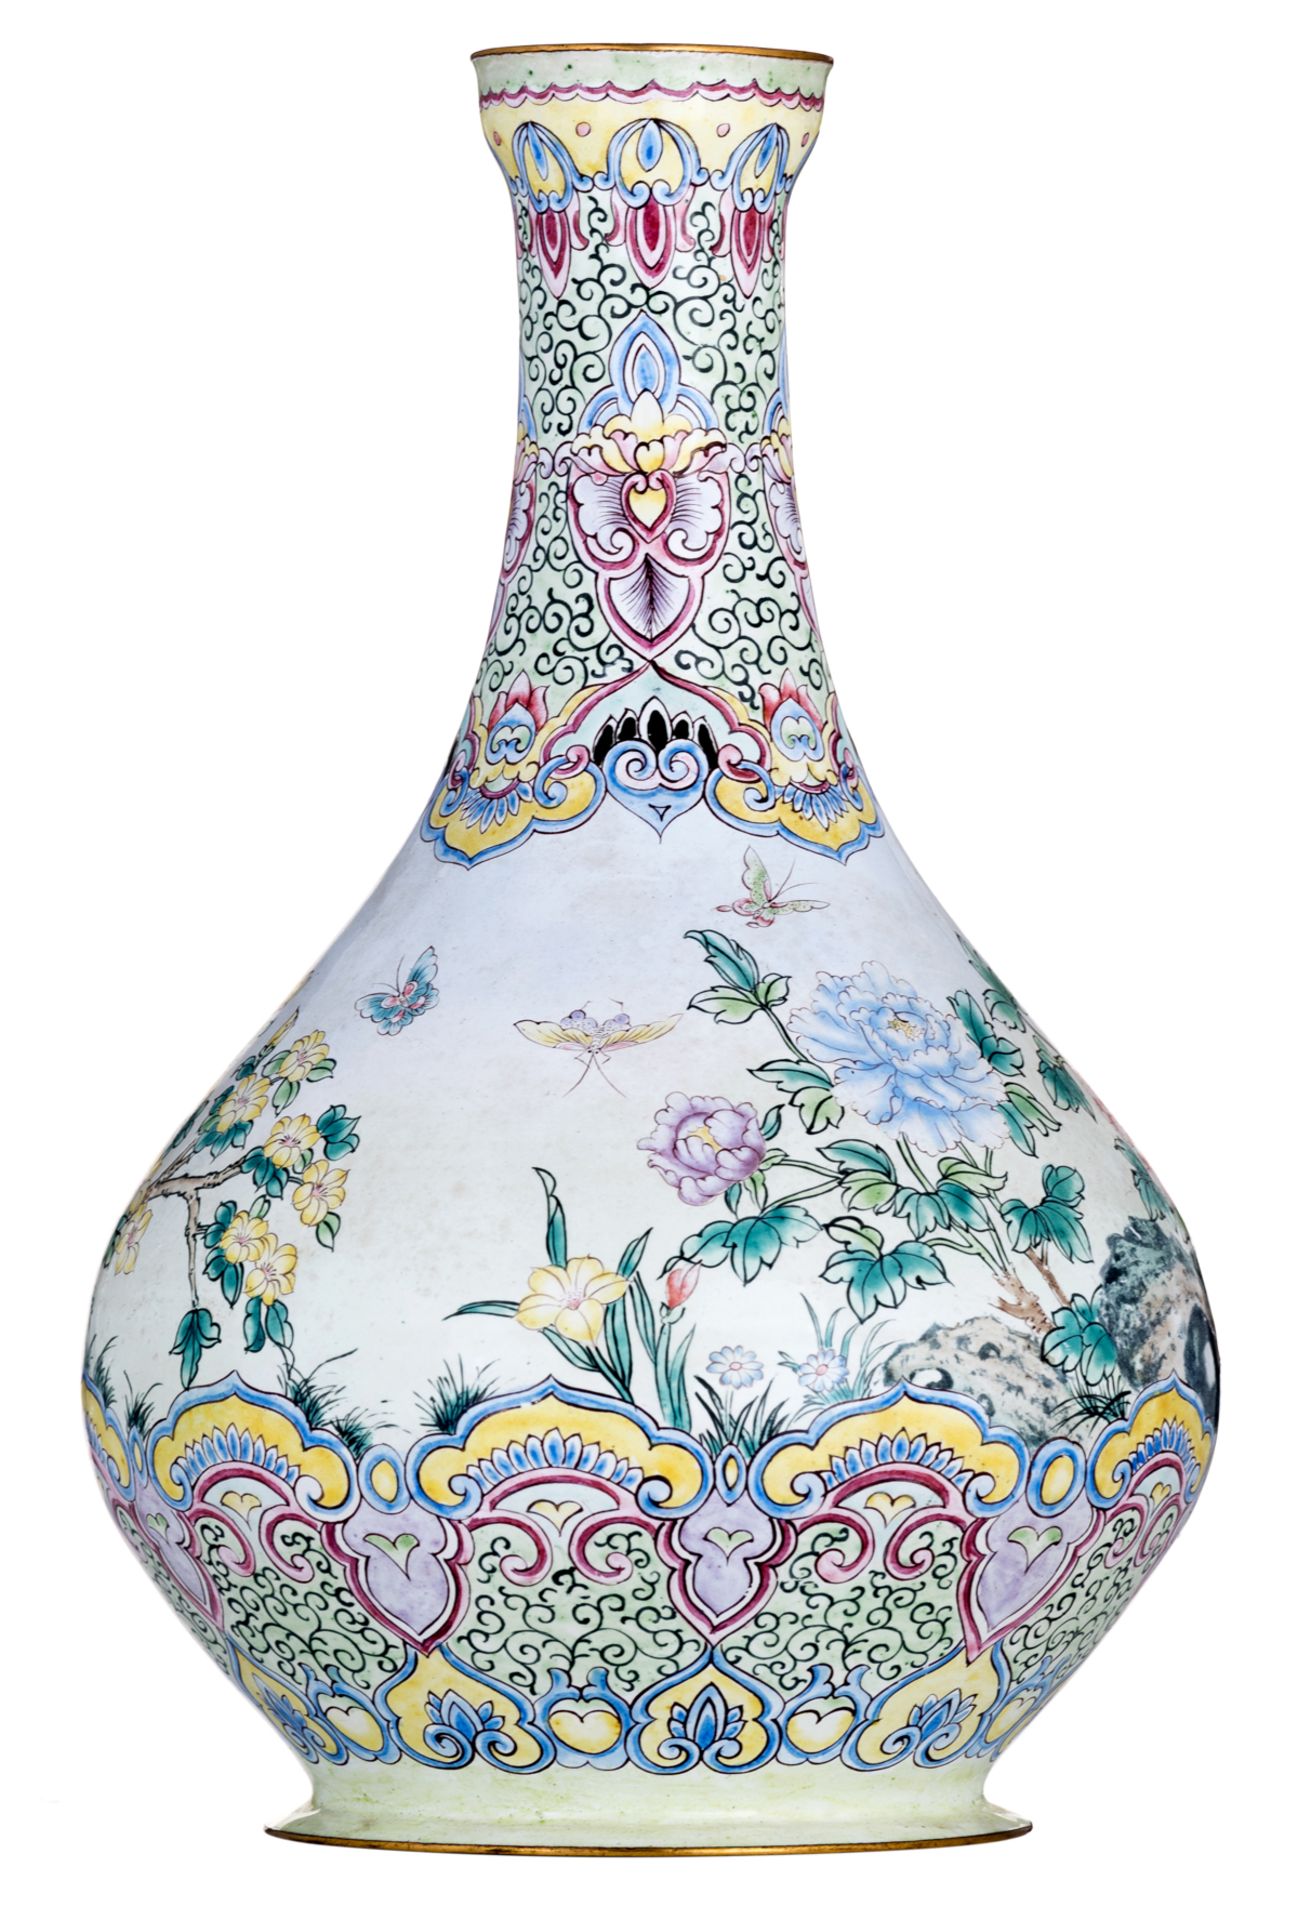 A Chinese Canton enamel bottle vase, decorated with rocks, flowers and butterflies, H 29 cm